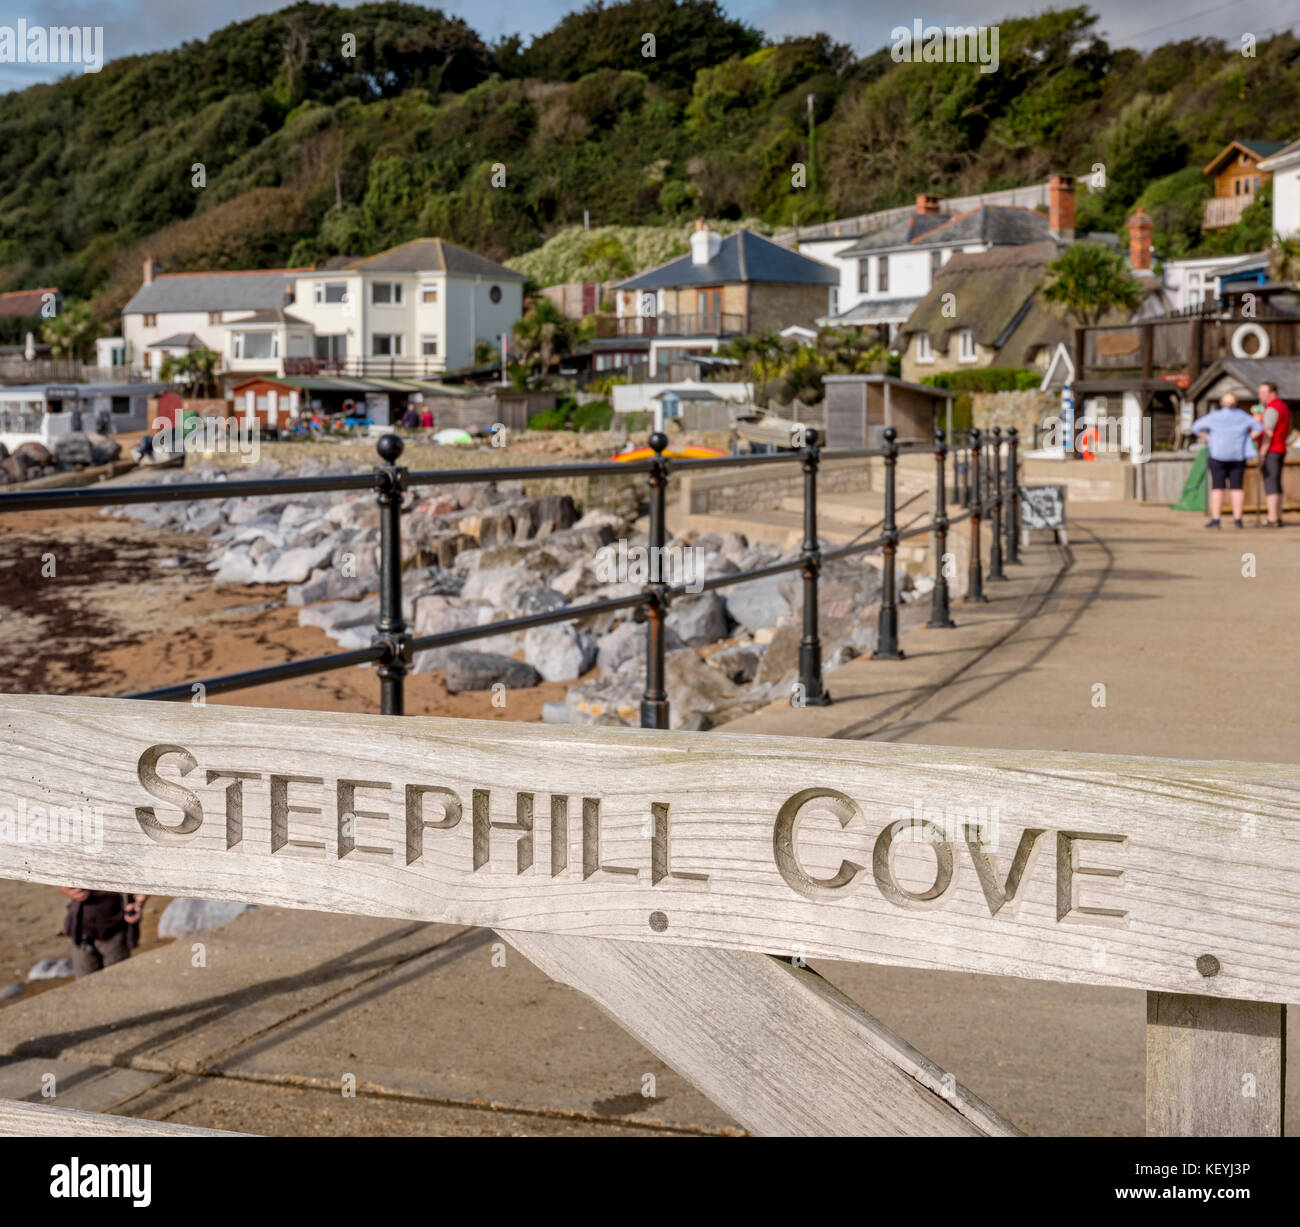 Steephill Cove on the Isle of Wight near Ventnor. The cove can only be reached on foot by visitors. Stock Photo